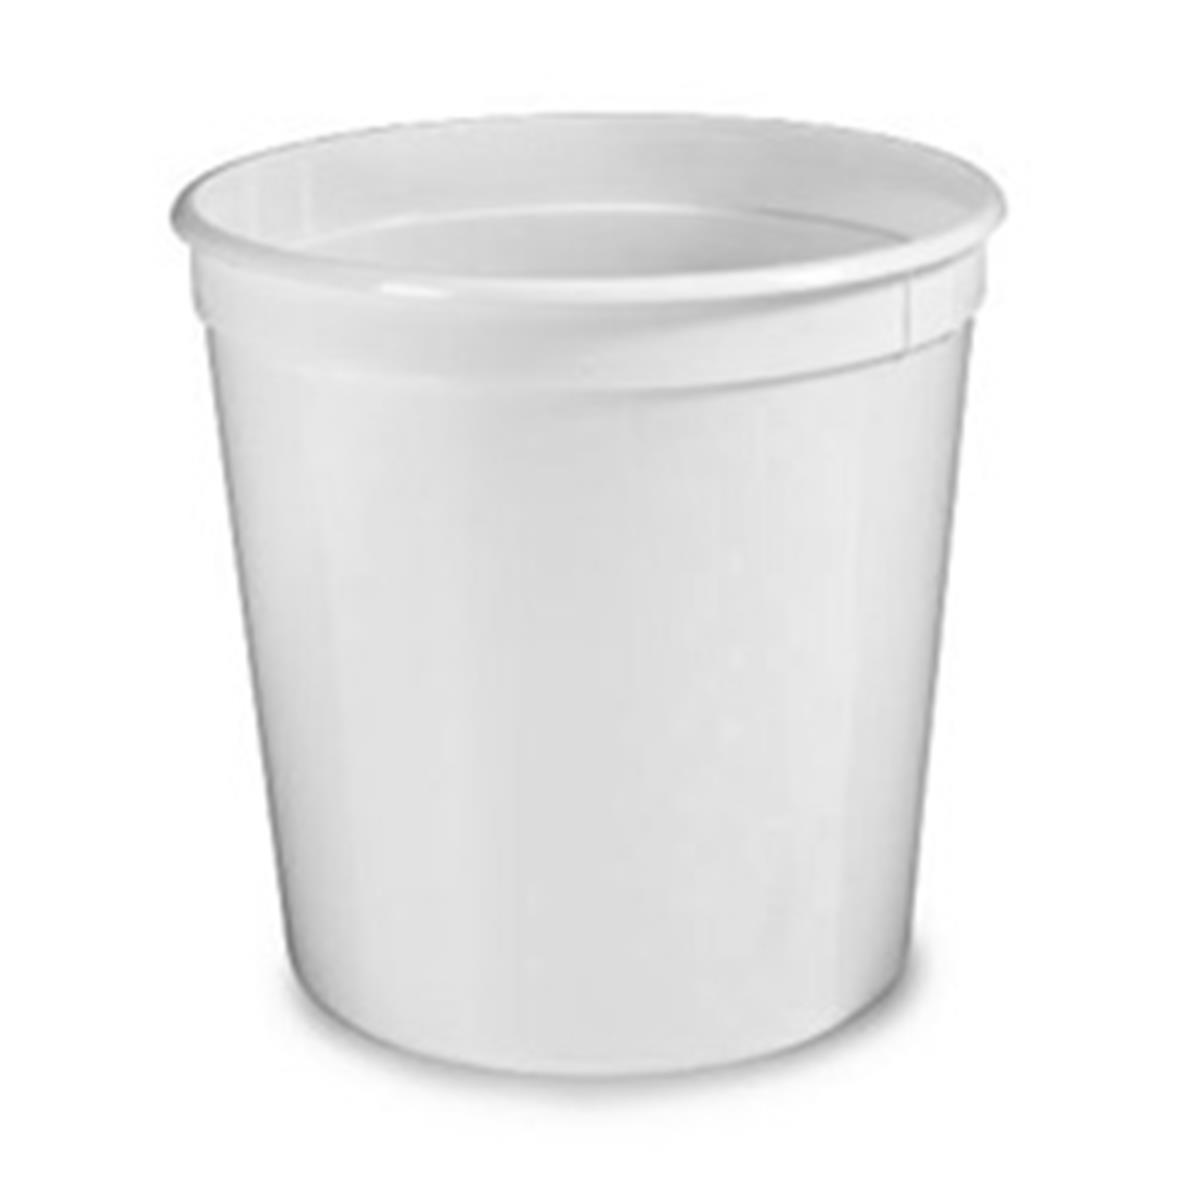 Plastic Packaging Corporation Cl86w White Container - Case Of 200, 5 Lbs.